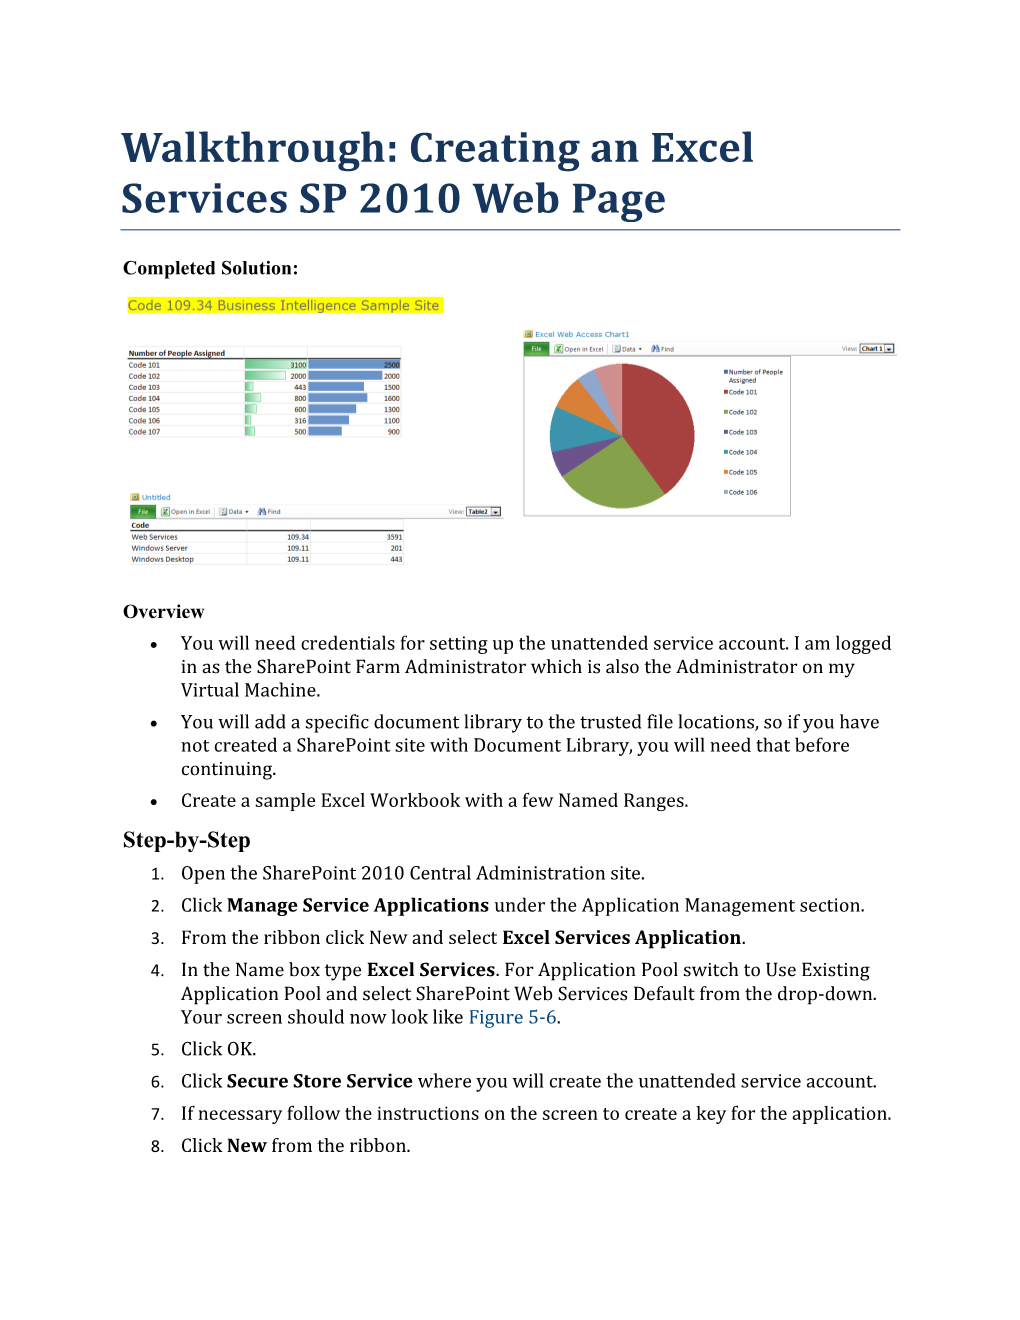 Walkthrough: Creating an Excel Services SP 2010 Web Page